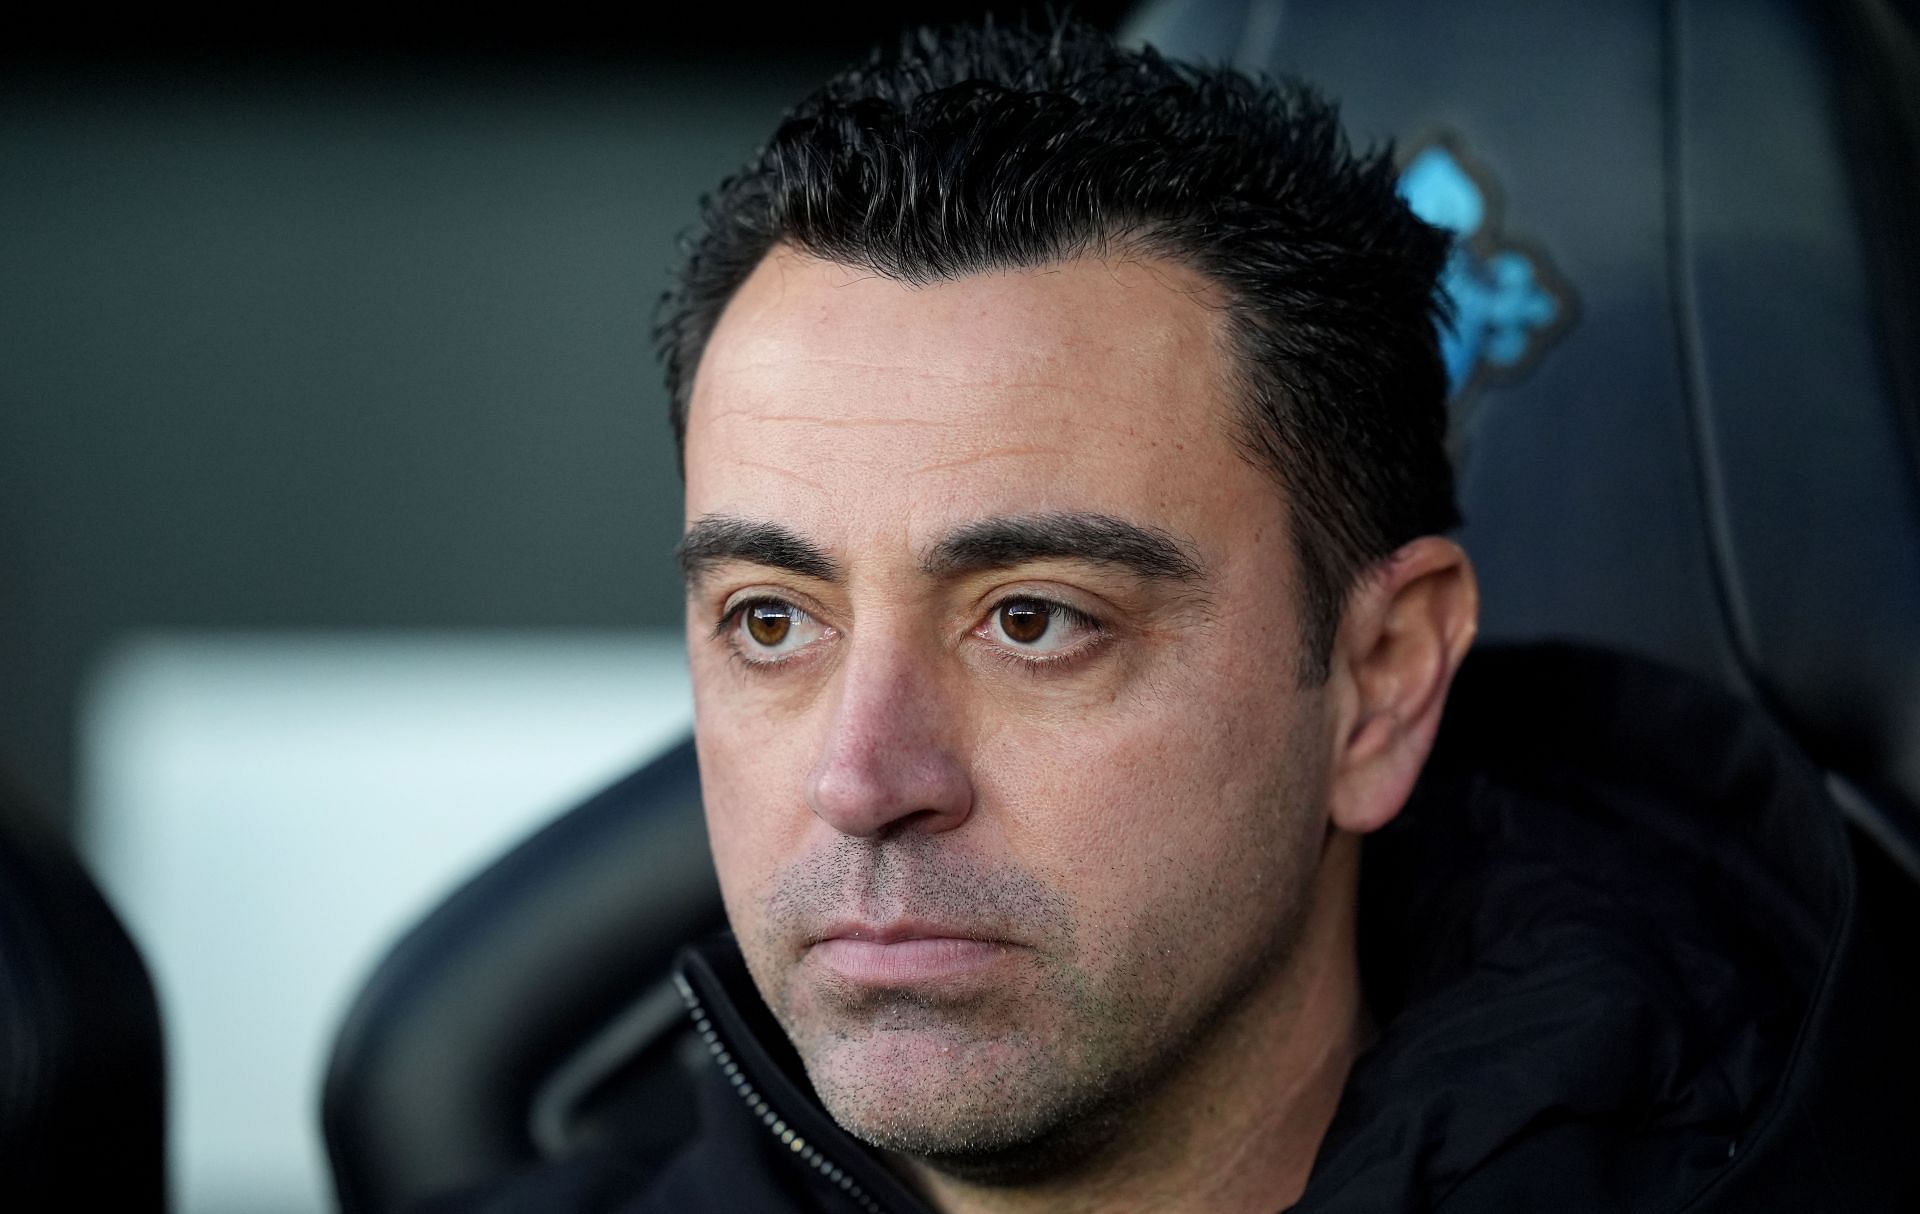 Barcelona make contact with Xavi replacement as Deco looks to finalize deal - Reports